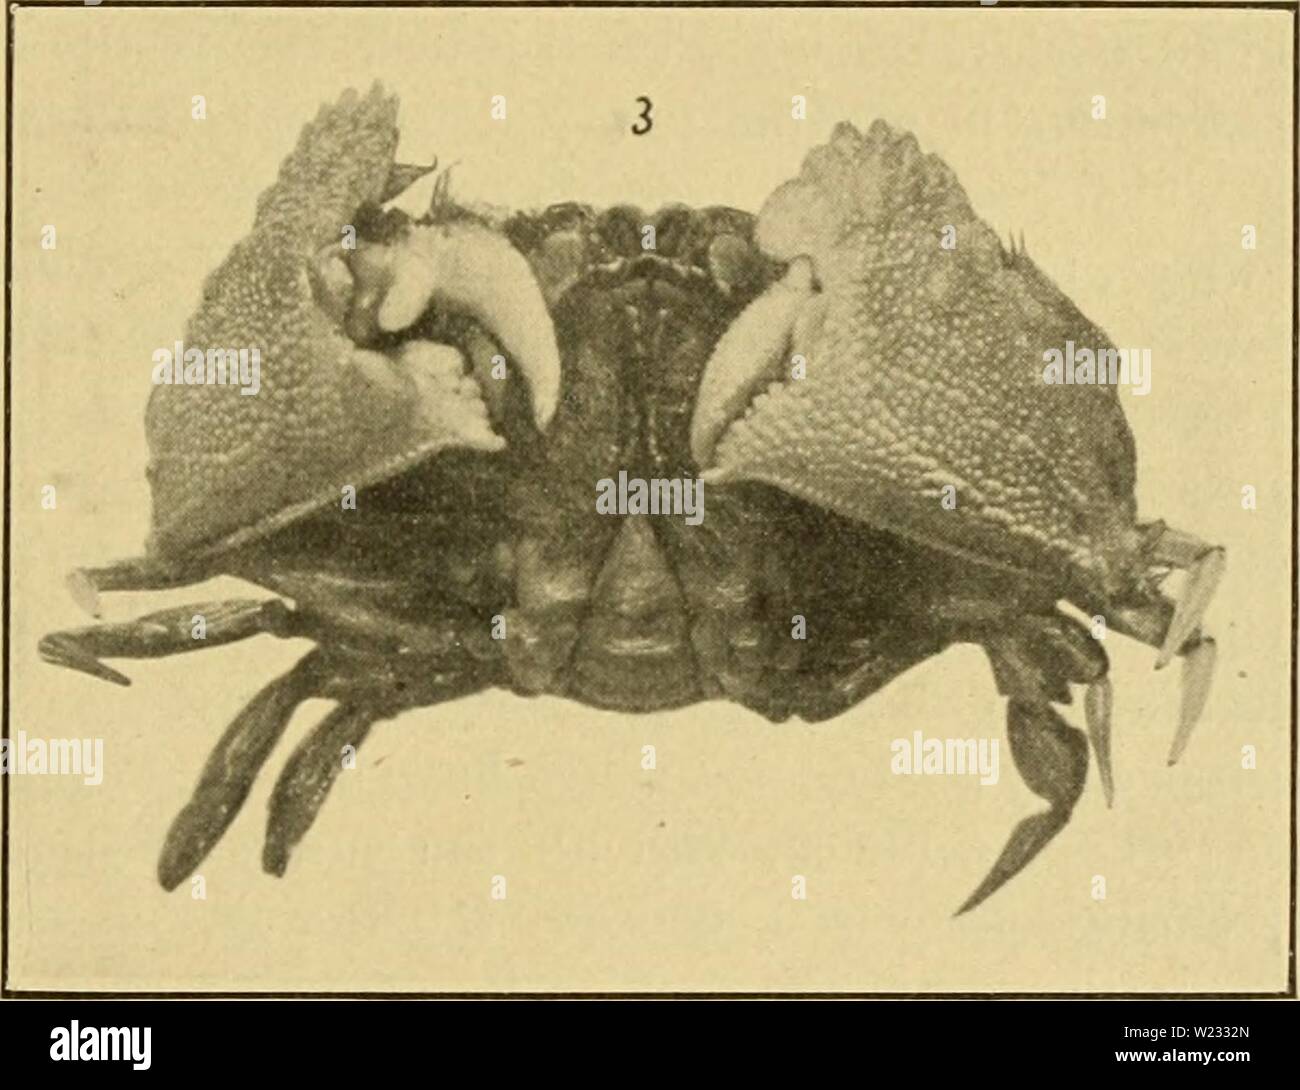 Archive image from page 128 of Decapod Crustacea of Bermuda Their. Decapod Crustacea of Bermuda. Their distribution, variations, and habits  decapodcrustacea1908verr Year: 1908  A. E. Verrill—Decapod Crustacea of Bermuda. 425 form has the carapace more strongly ai-eolated and appears rougher, owing to the relatively larger granules and more elevated tuber- cles. The two frontal teeth are more acute and have a small lobe or shoulder on the outer edge, while those of C. Bairdii are obtuse at tips and have no lobe. The carapace has the posterior lateral spines sharper, longer, and farther back, i Stock Photo